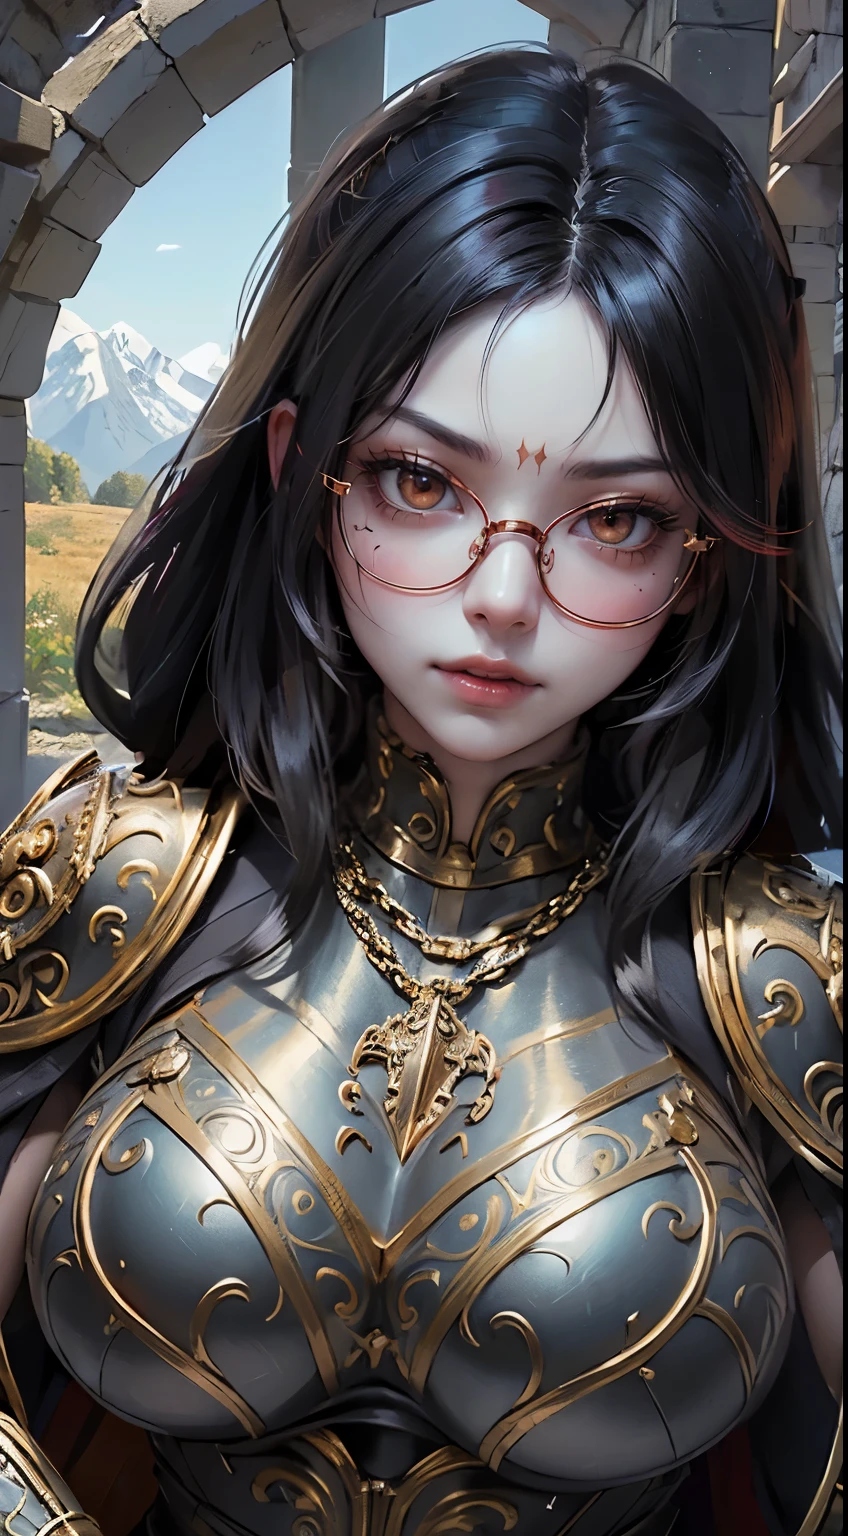 (masterpiece, highest quality, highest quality, Official Art, beautifully、beautiful:1.2), (One Girl:1.3), Light freckles, Fair skin, Very detailed, Portraiture, View your viewers, alone, (whole body:0.6), detailed background, close, (Warm Meadow theme:1.1), Paladin, Charlatan, Grin, Mysterious, Swaying in the mountains, modest clothing, ((((Ornate black and gold metal plate armor)))), Cowl, nun food, Wimple, armor, Cowl, Robe, Chain mail, Chain mail, leggings, Chain mail leggings, Chain mail leggings, (armor breastplate), Tabard, throat, food, Scapula, Shingard, armor, Knee-high boots, Long sword, shield, Cape, Cape, pearlescent metal, Black cloth, Light Leather, ((((Huge breasts)))), Tight waist, Slim Hips, Long legs, Medieval (The appearance of the mountain:1.1) background, dark Mysterious lighting, Shadow, Magical atmosphere, Dutch Angle,